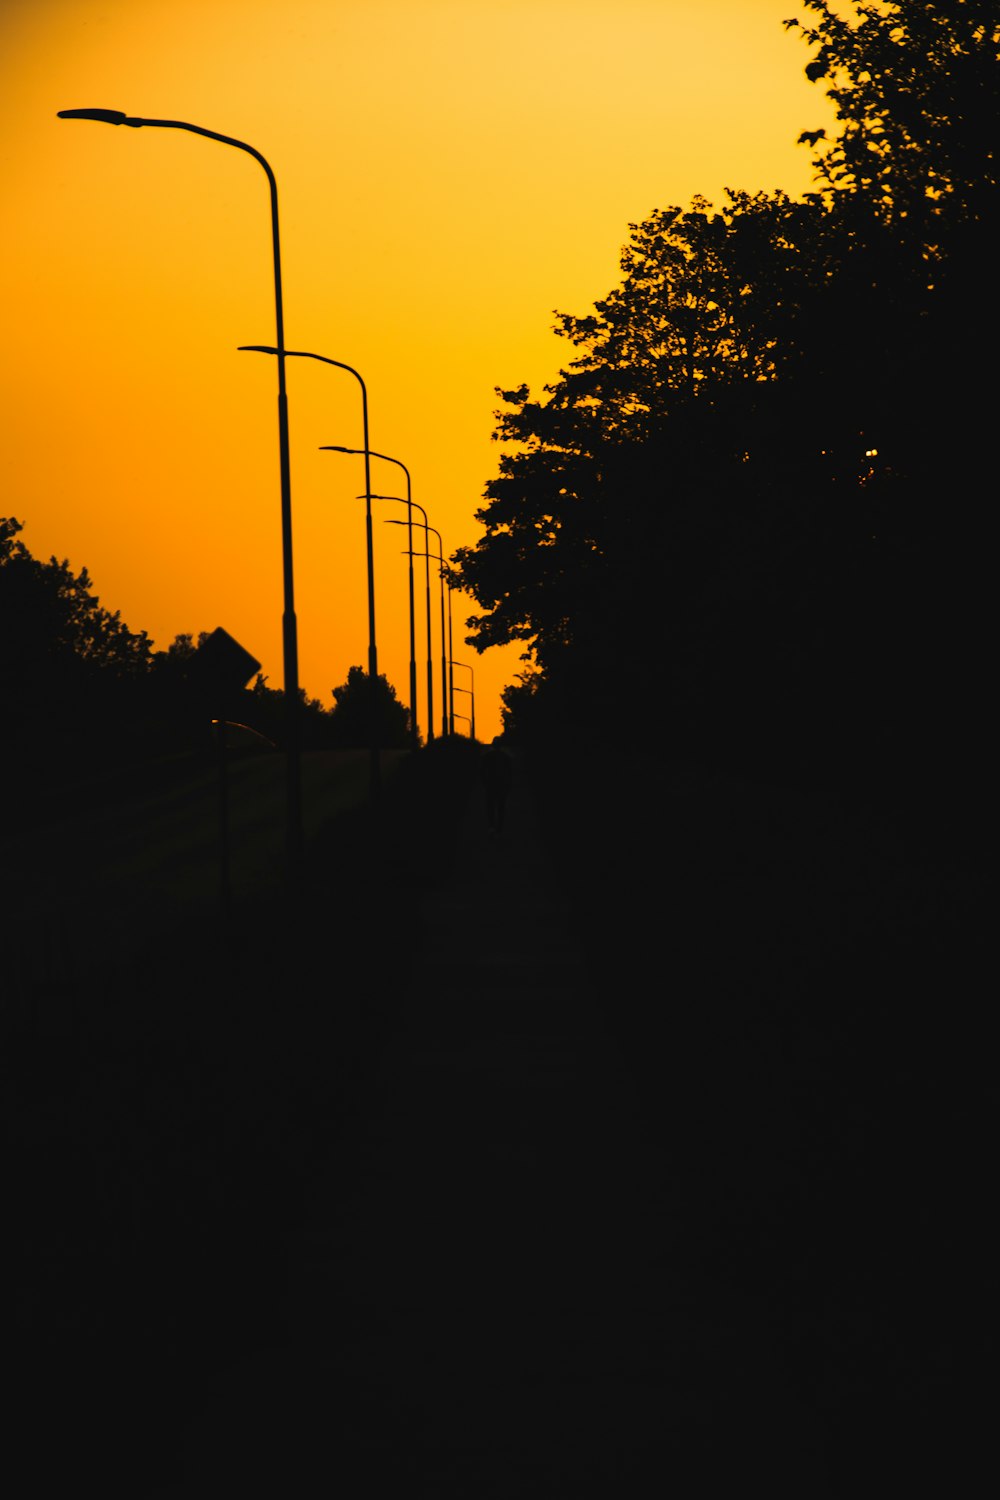 the sun is setting behind a row of street lights